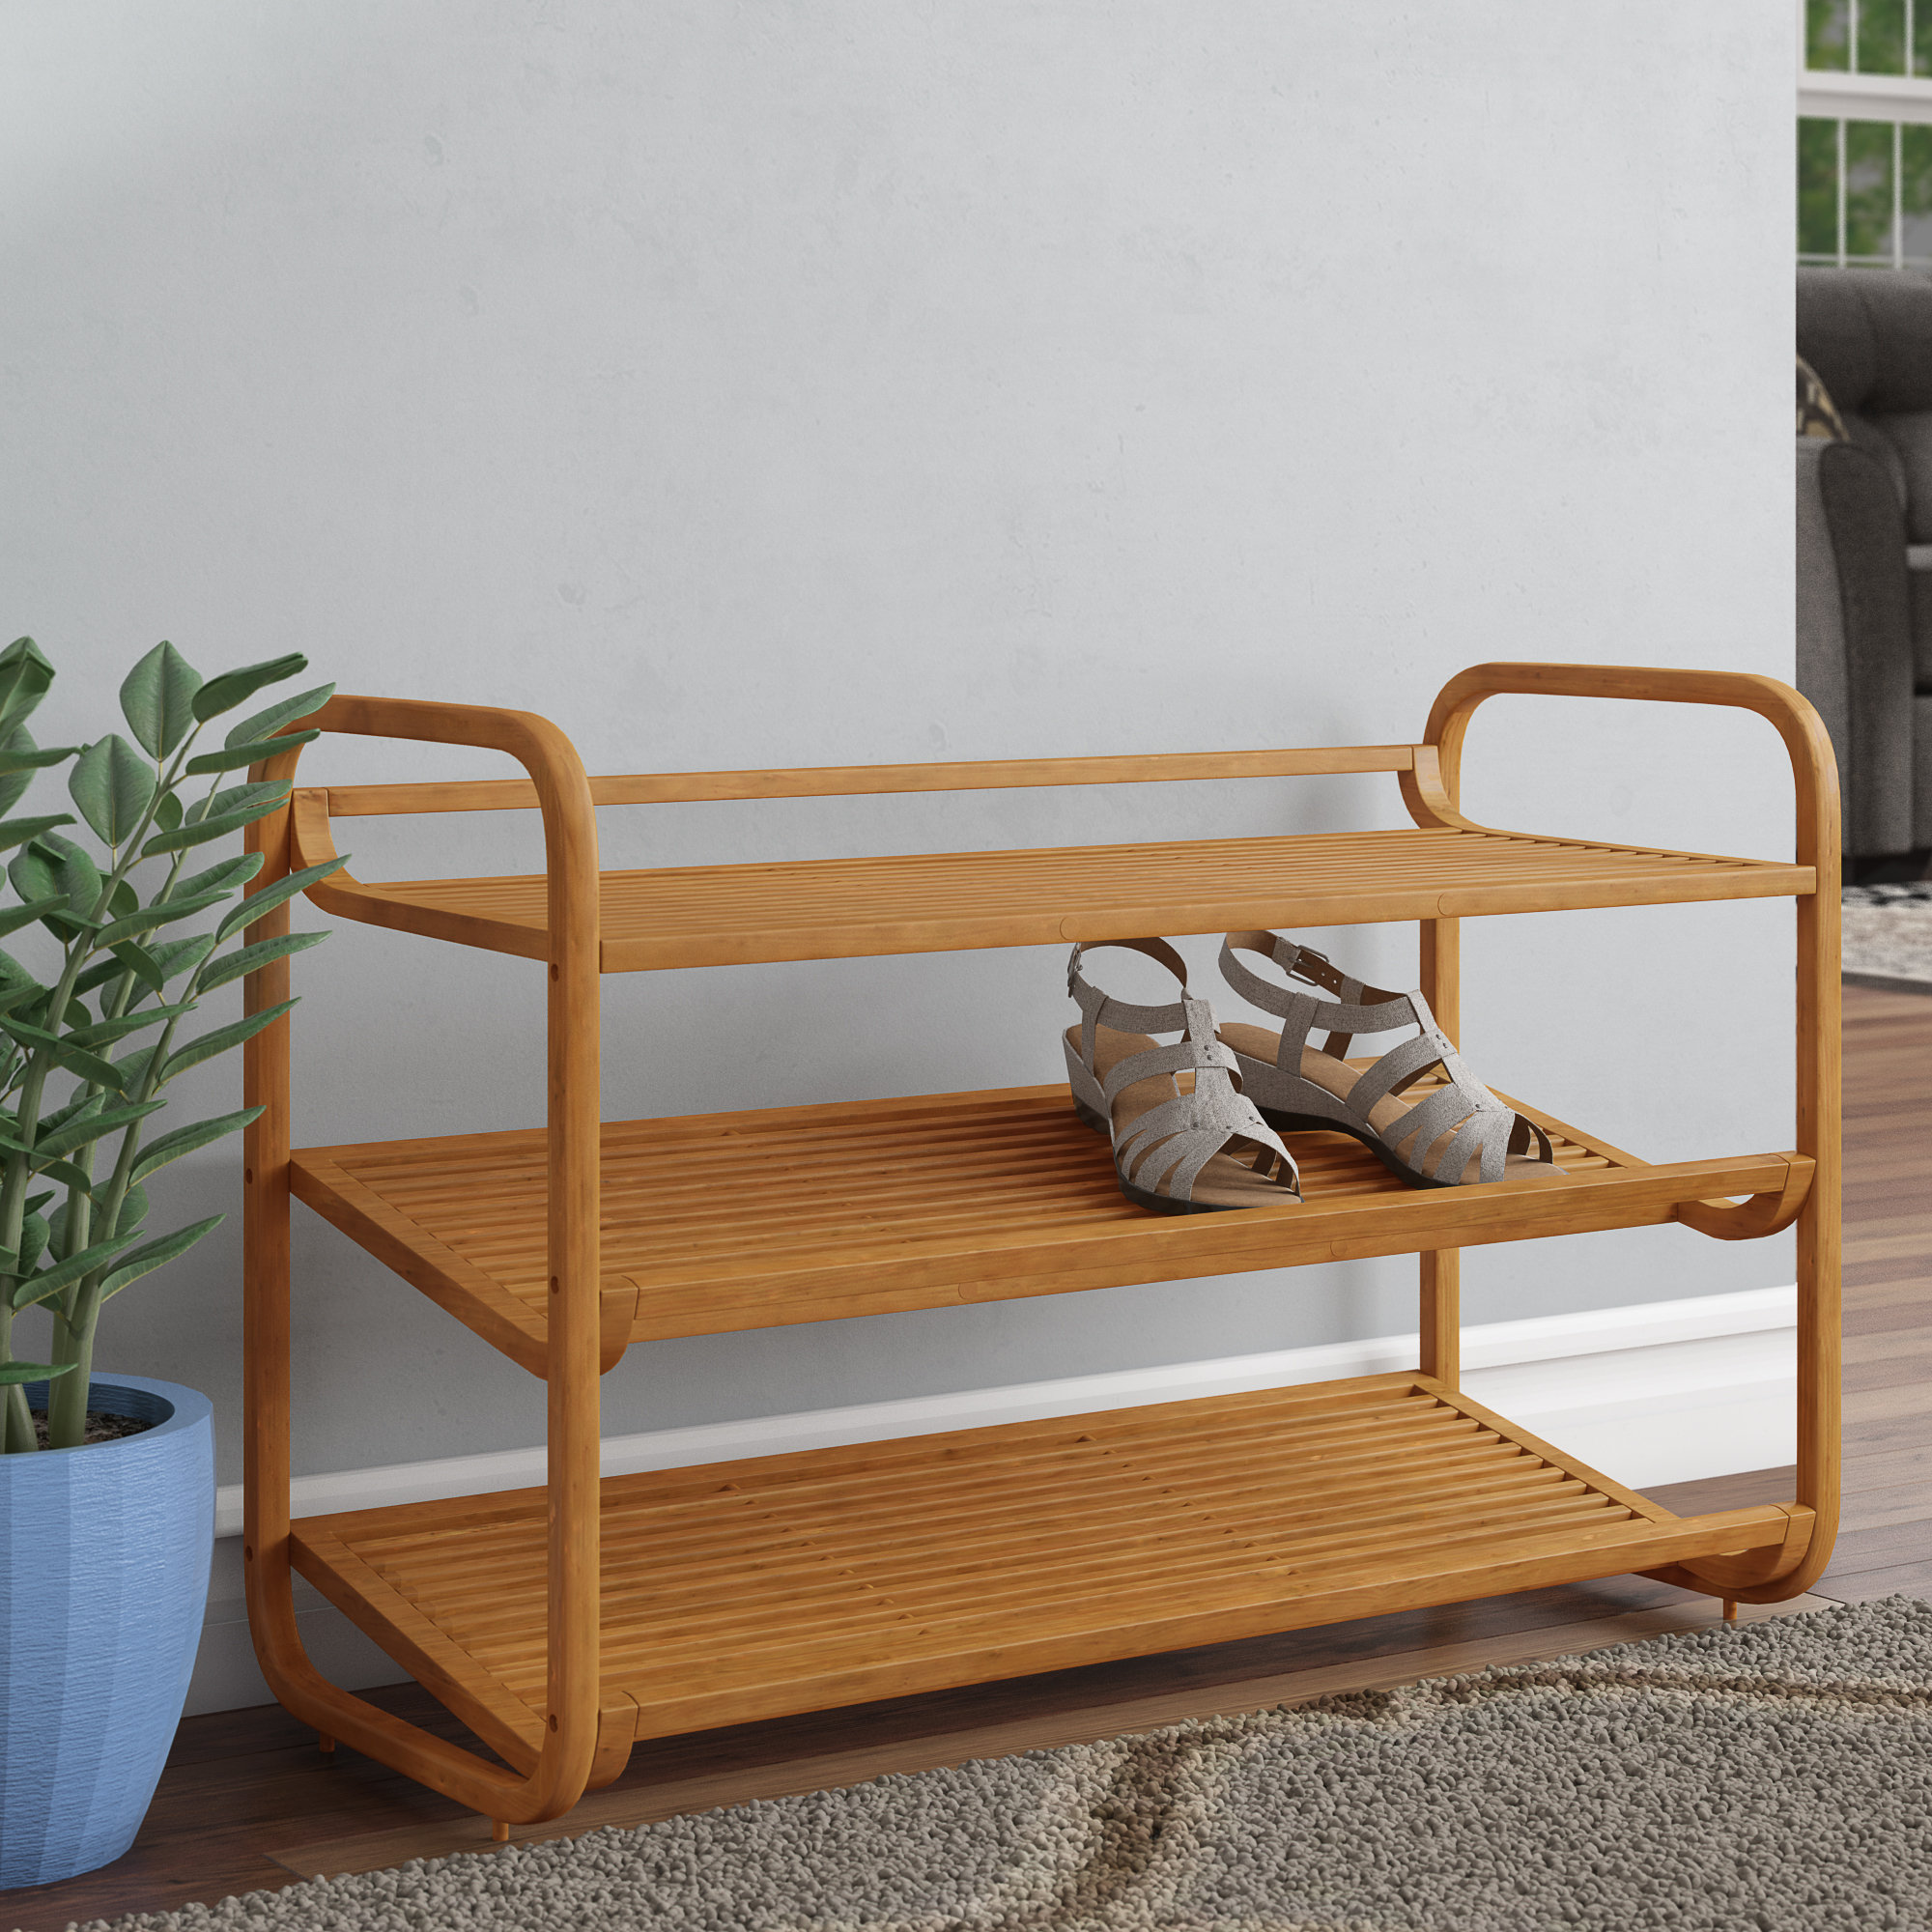 Tall Shoe Rack: Wood Shoe Rack For Closet [In Stock Now] White / Slanted (4  Shelves) / 31.5 Wide